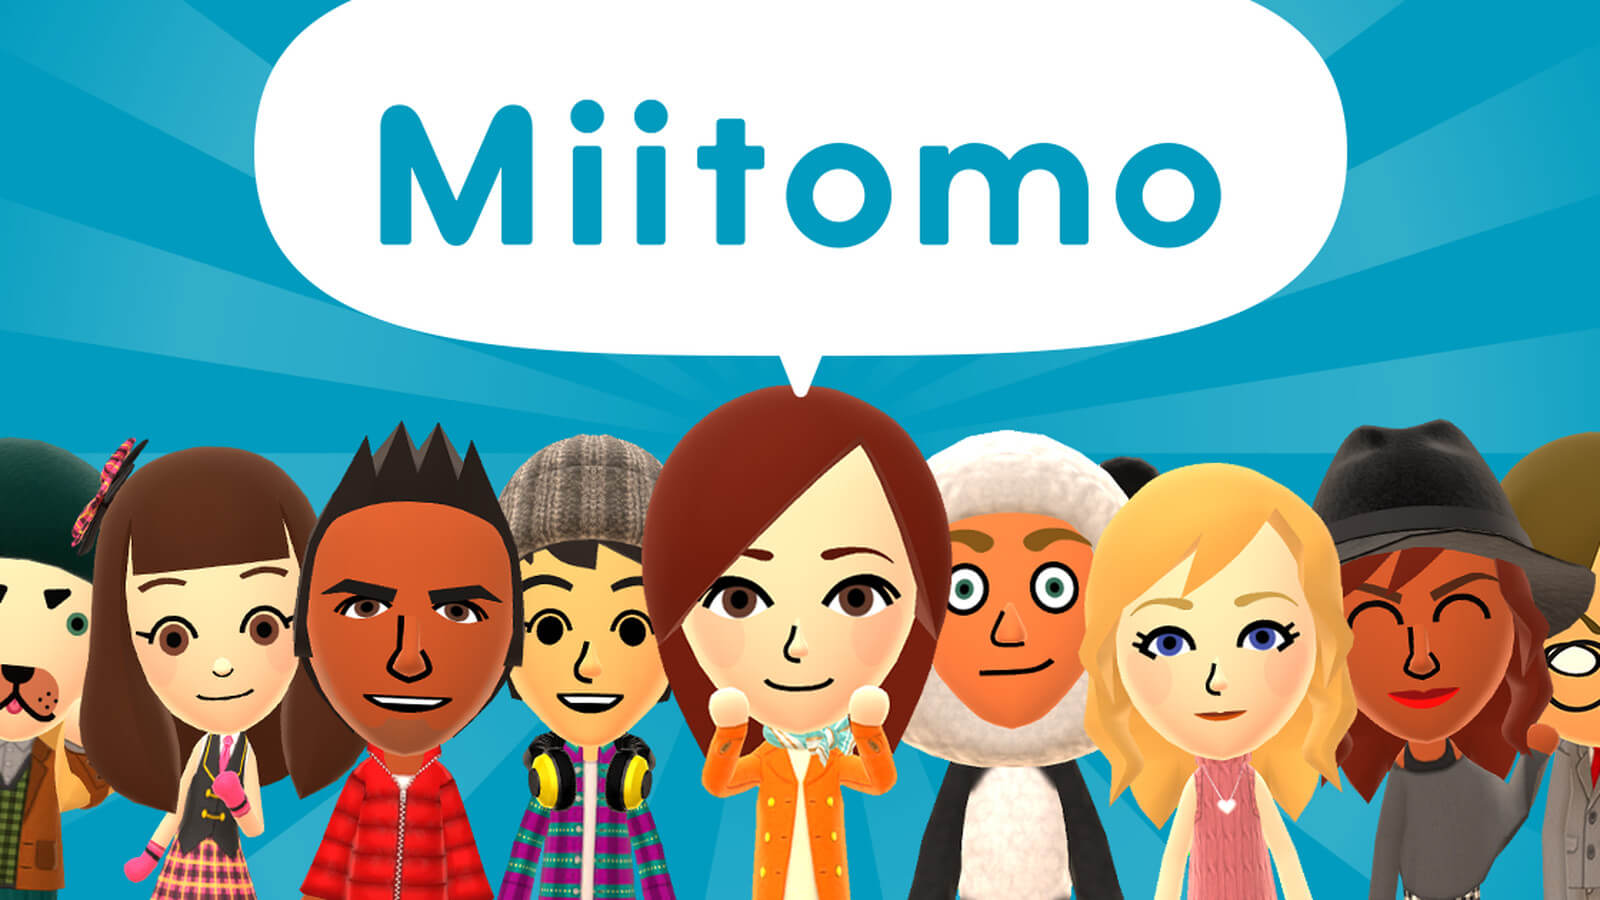 Nintendo is killing off its Miitomo mobile game just two years after launch